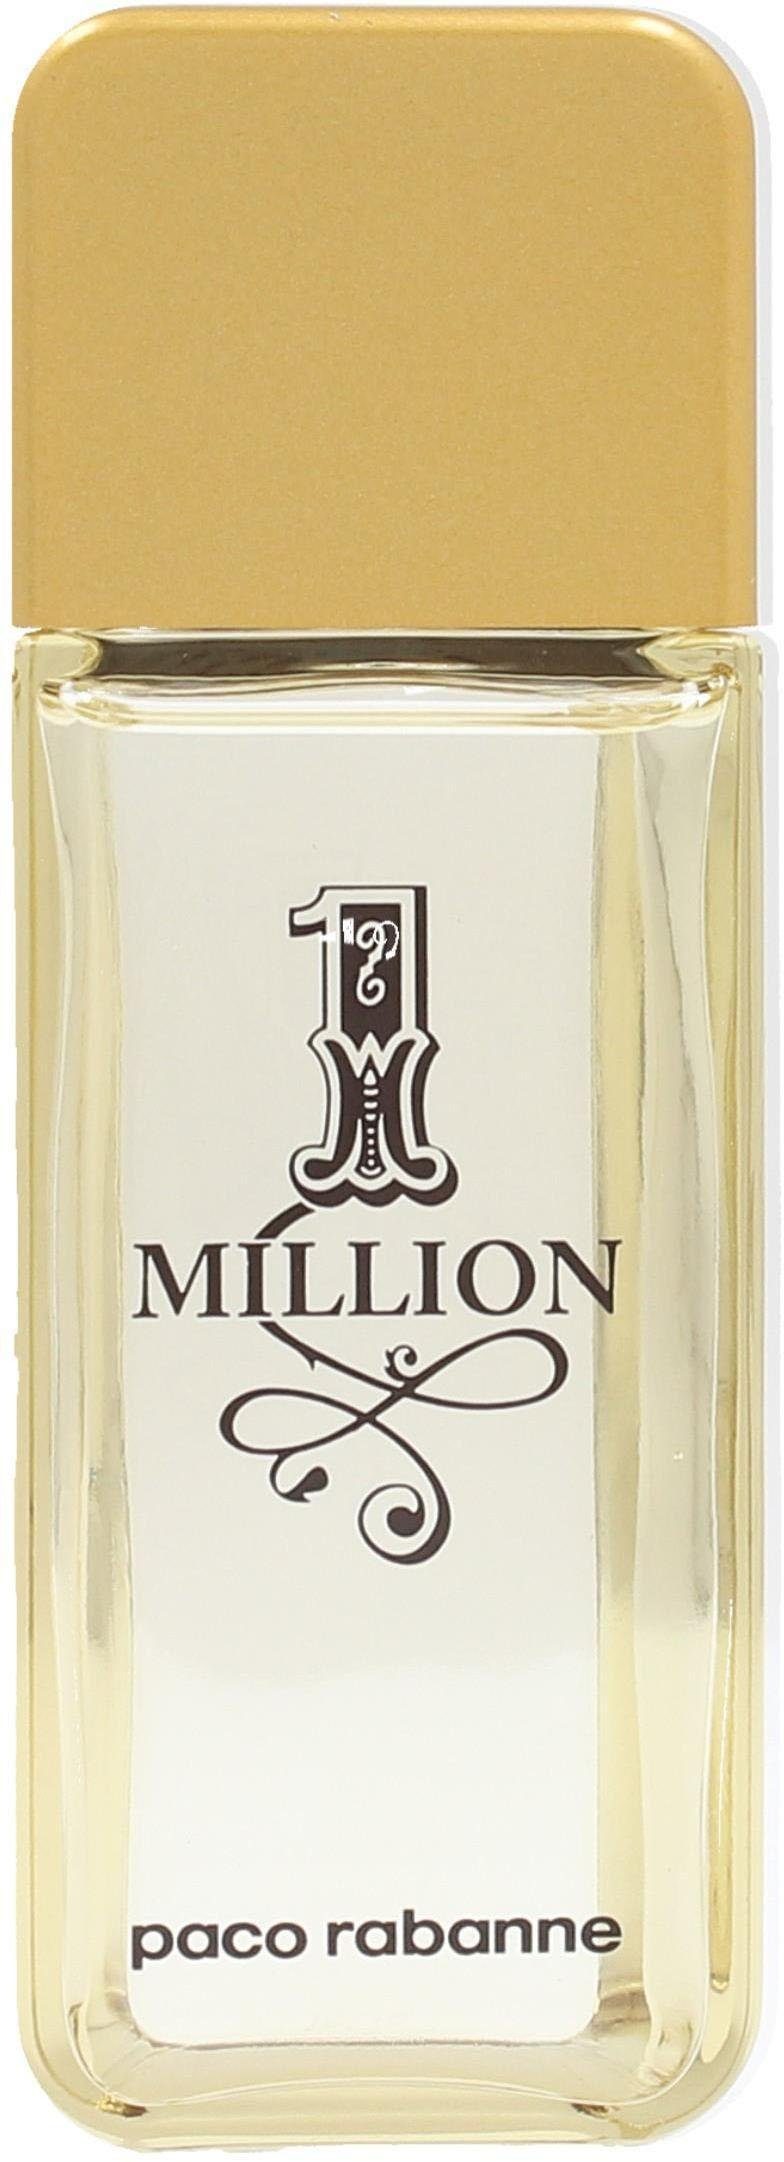 rabanne After-Shave Million 1 paco